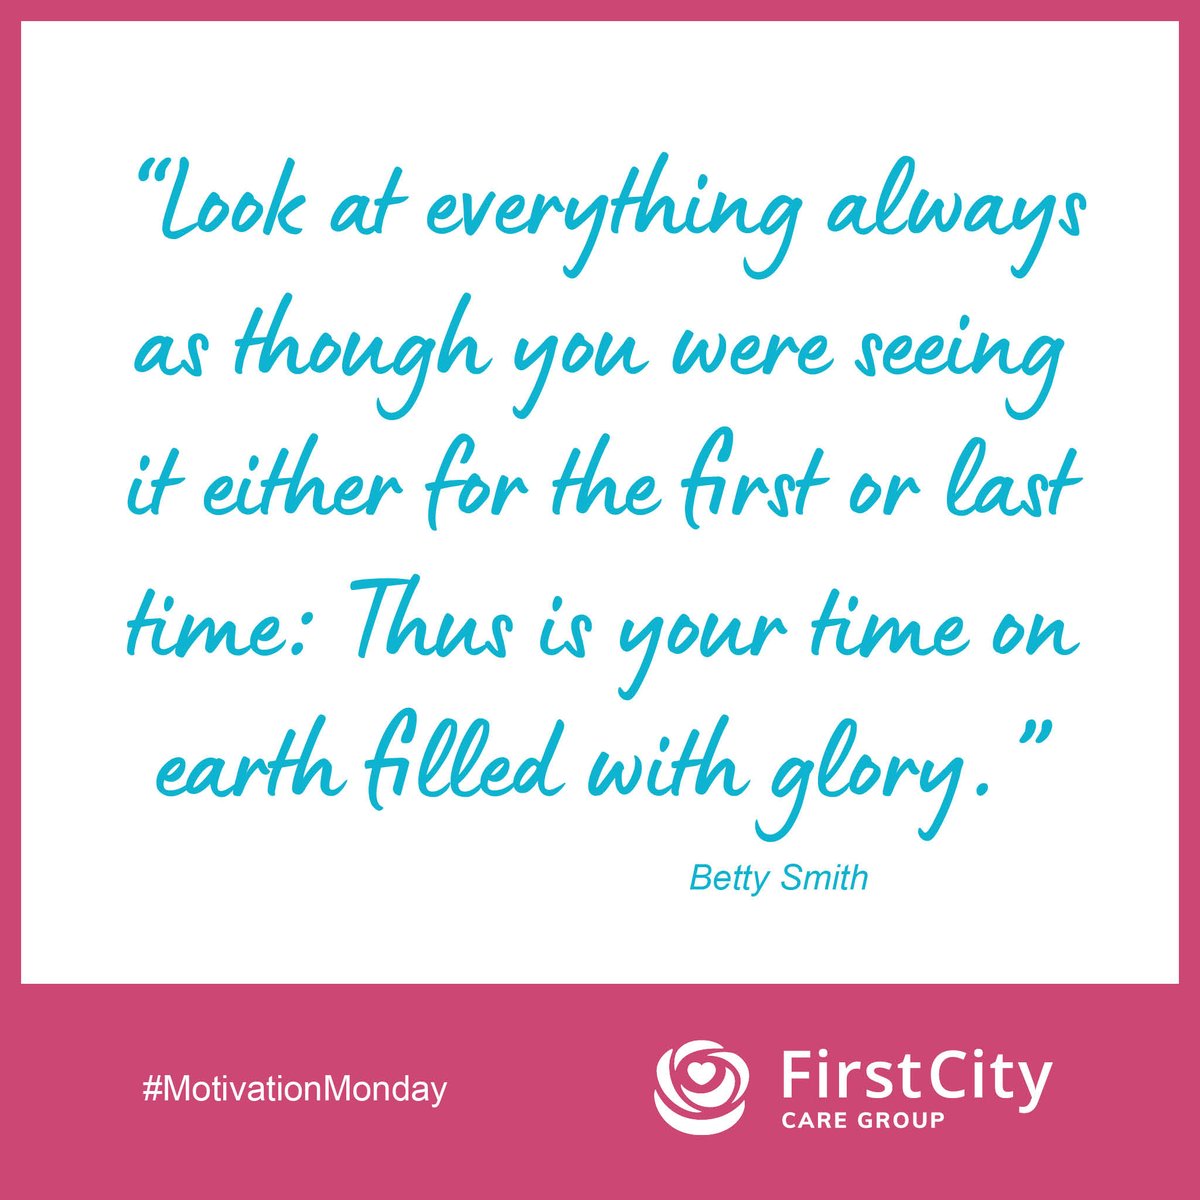 “Look at everything always as though you were seeing it either for the first or last time: Thus is your time on earth filled with glory.” 

#motivationmonday #motivationquotes #inspirationalwords